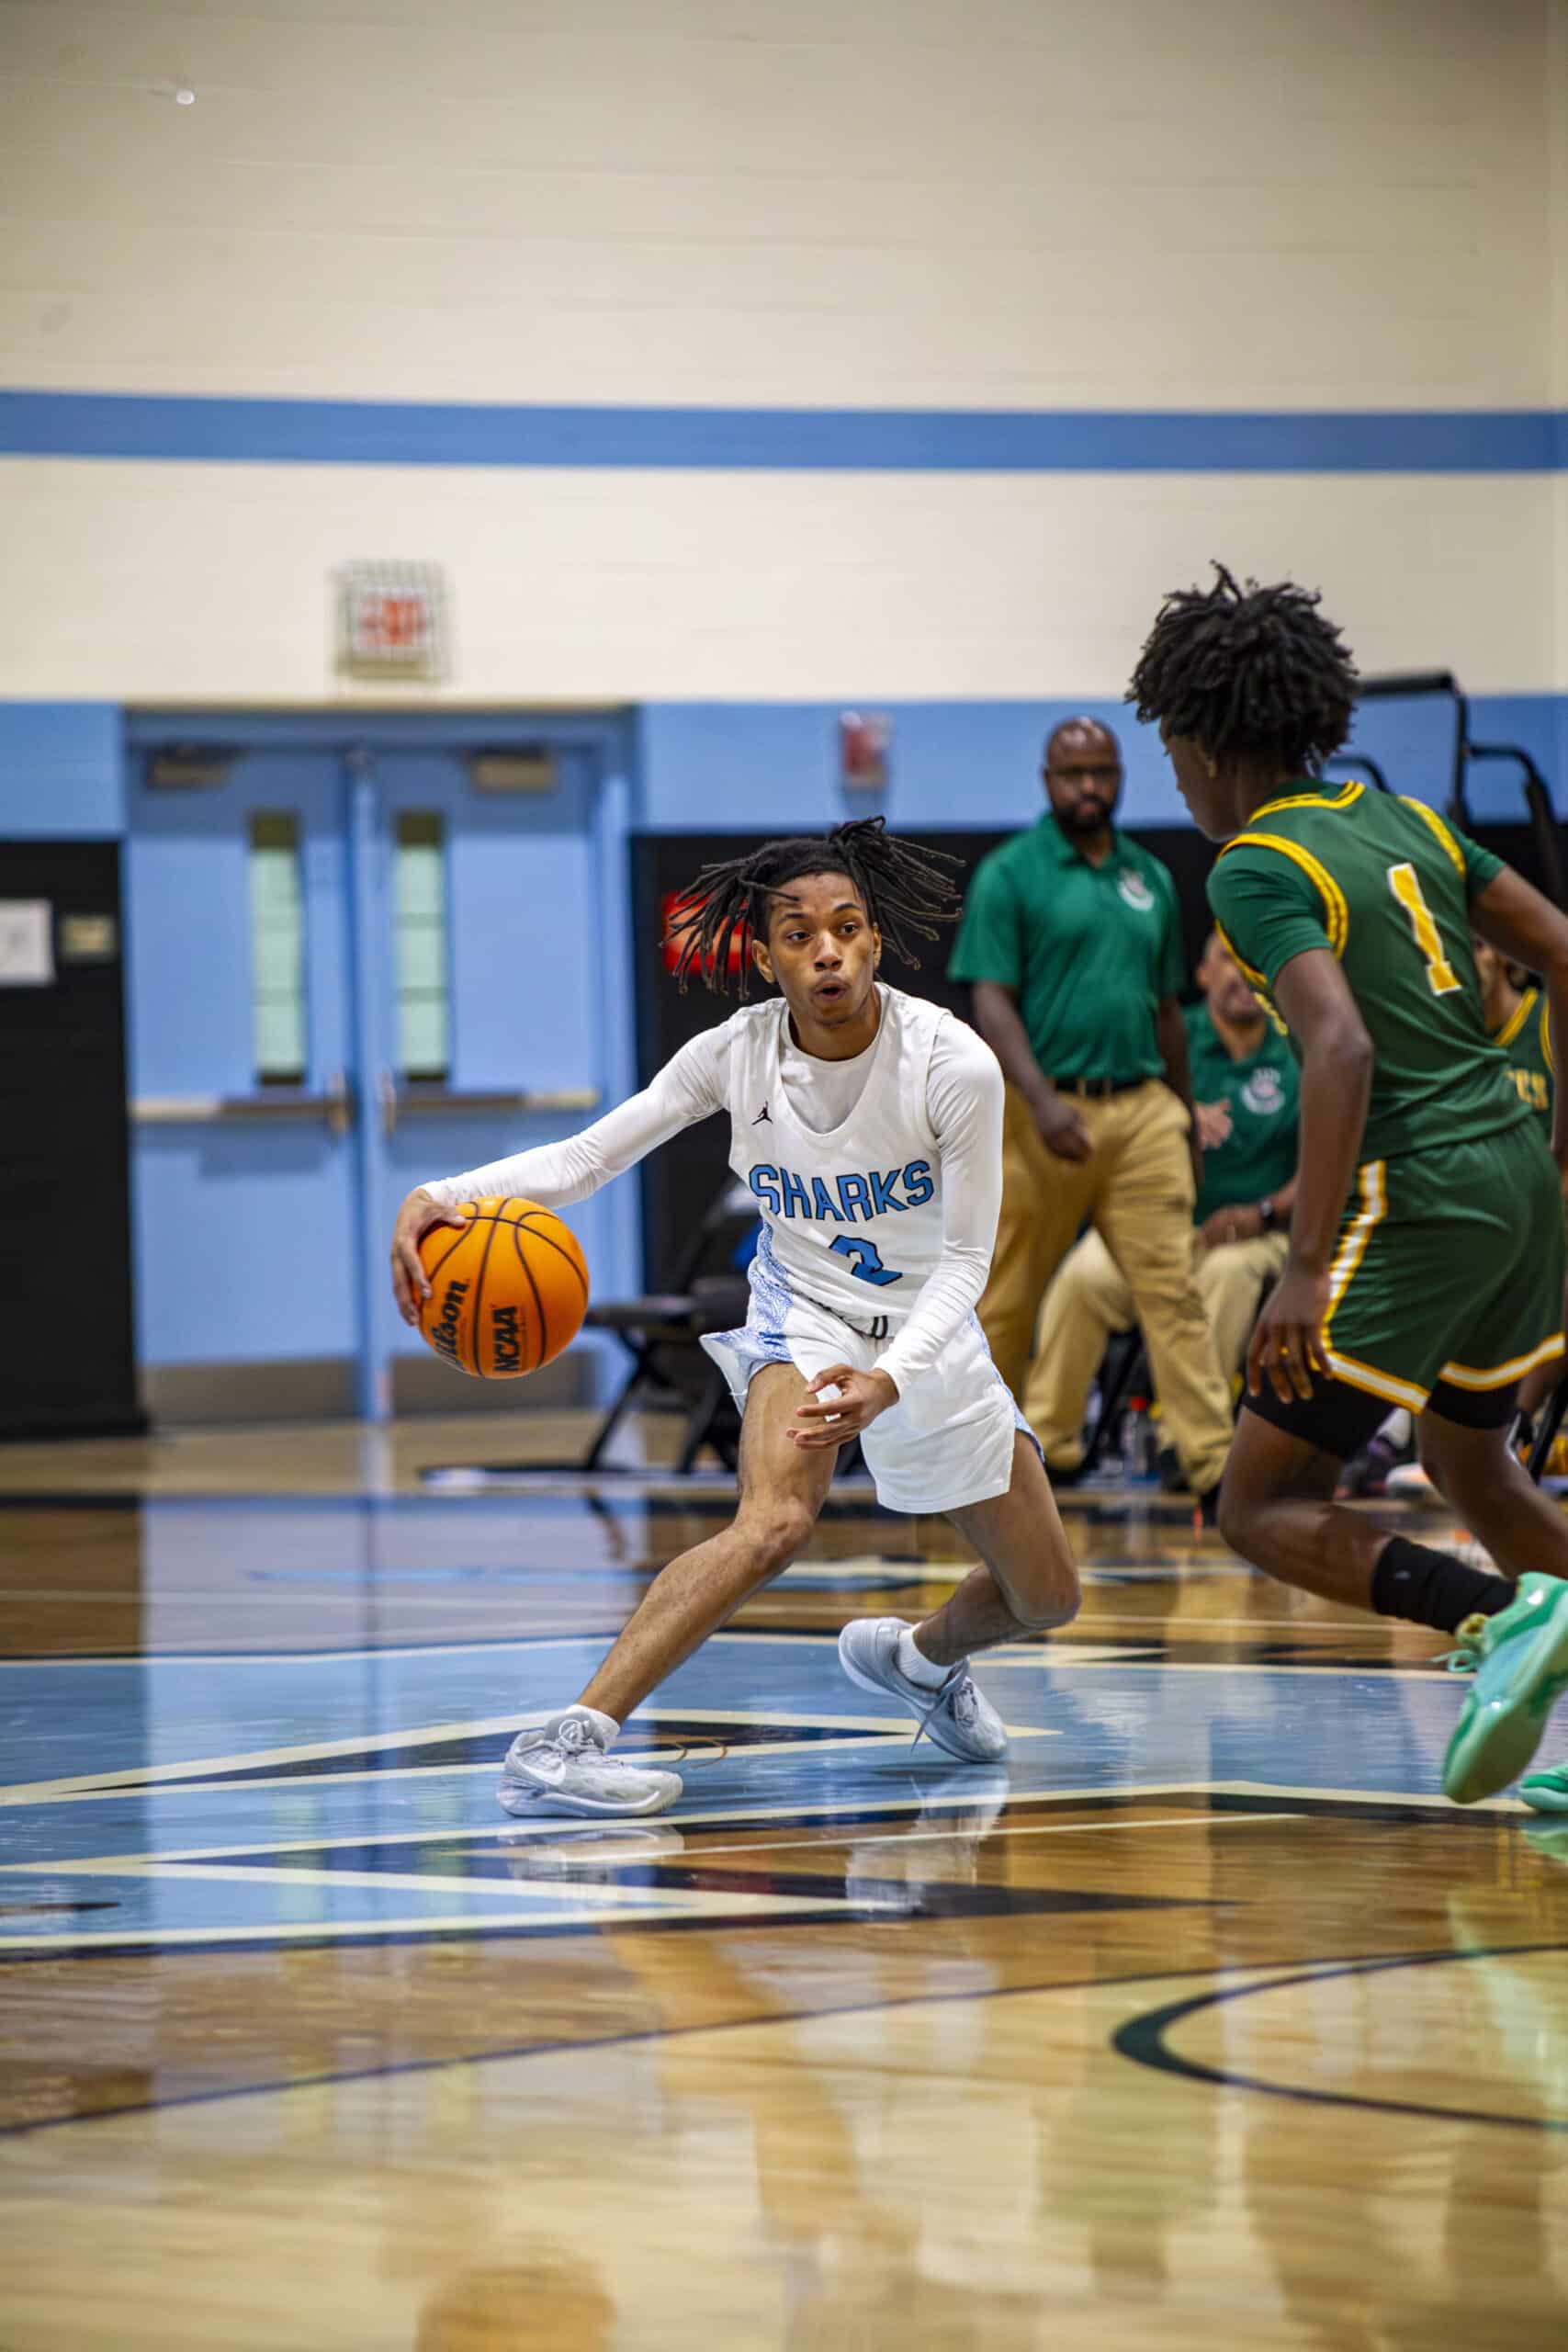 Nature Coast Christmas Tournament: NCT vs. Cypress Creek Coyotes. Photo by Hanna Maglio.